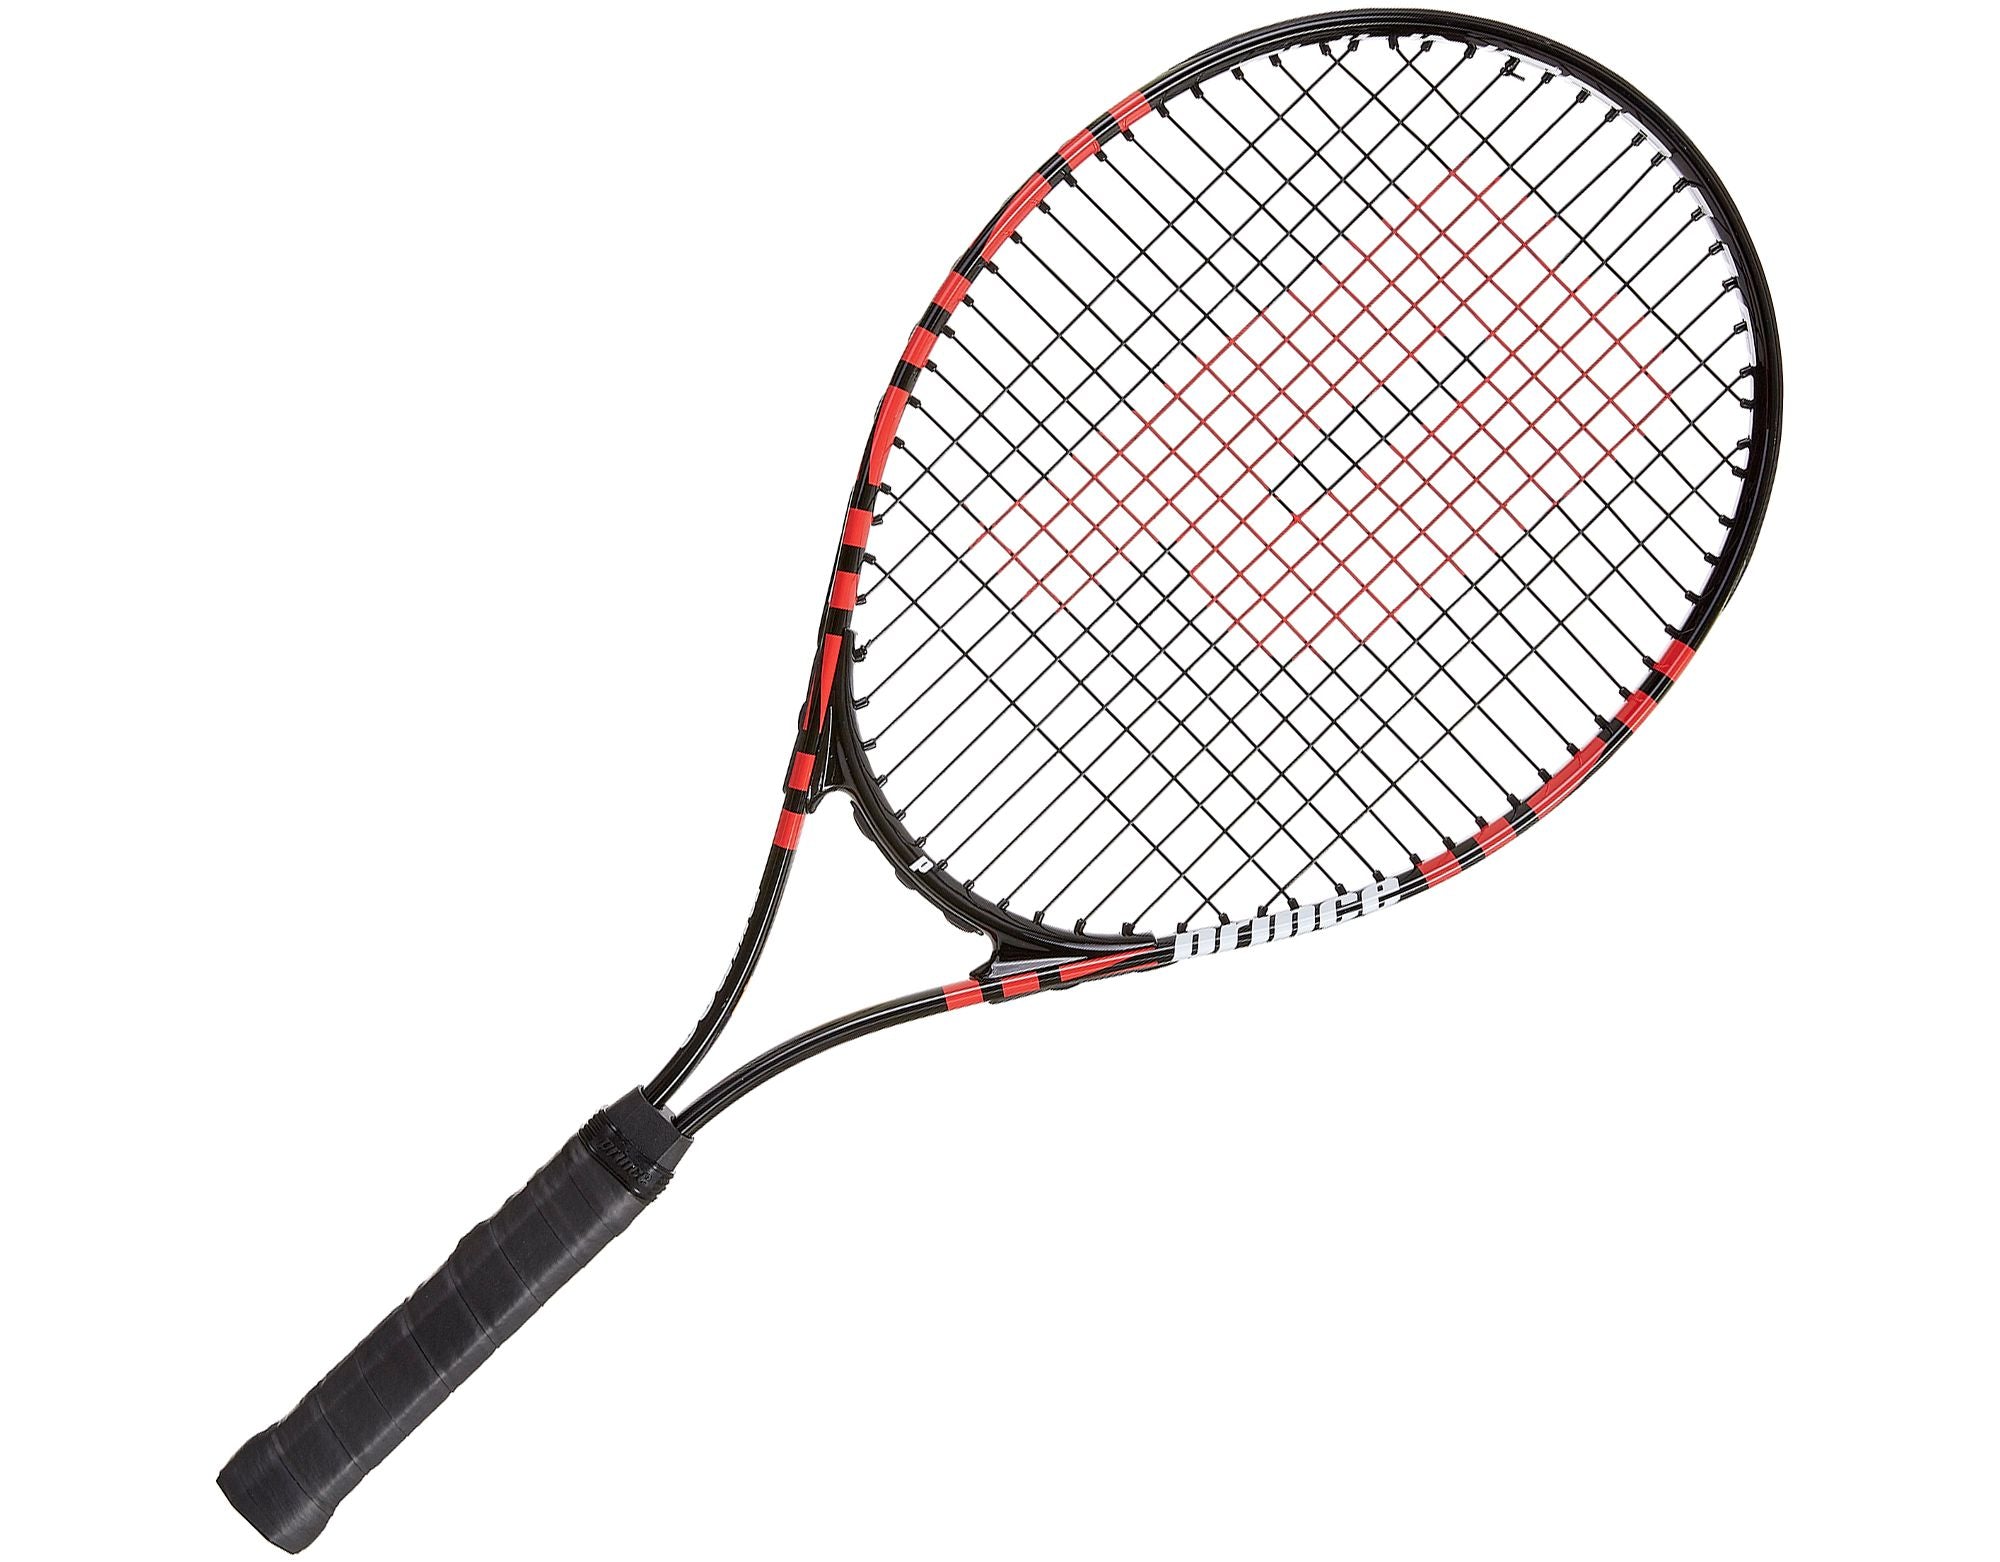 Prince 110 Thunder Tennis Racquet 2020 - BLACK/RED - SIZE 4 1/4 ...